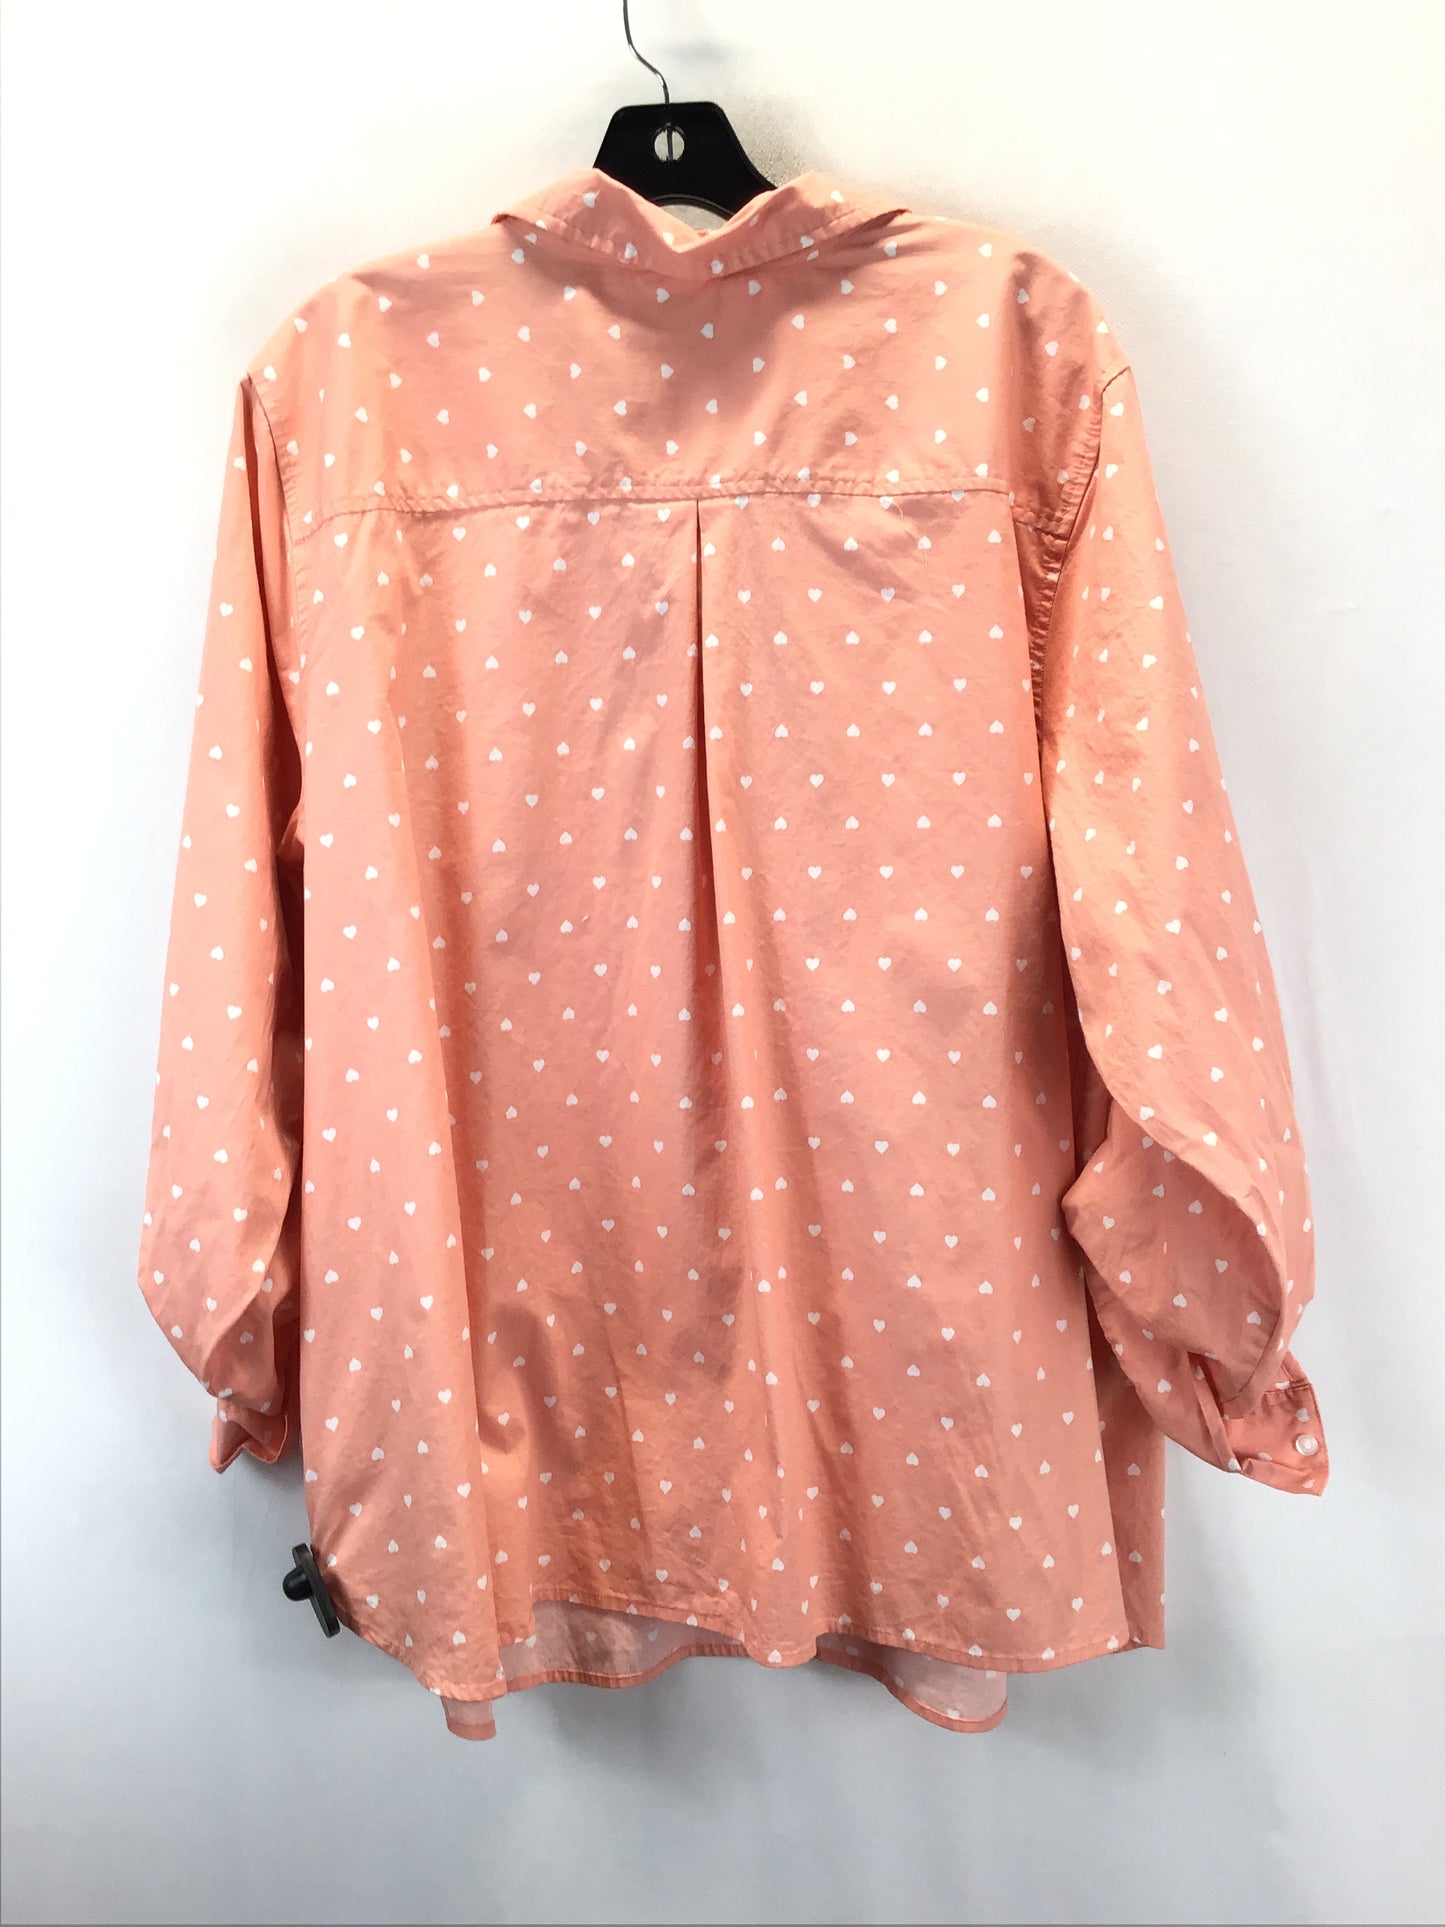 Top Long Sleeve By Croft And Barrow  Size: 3x